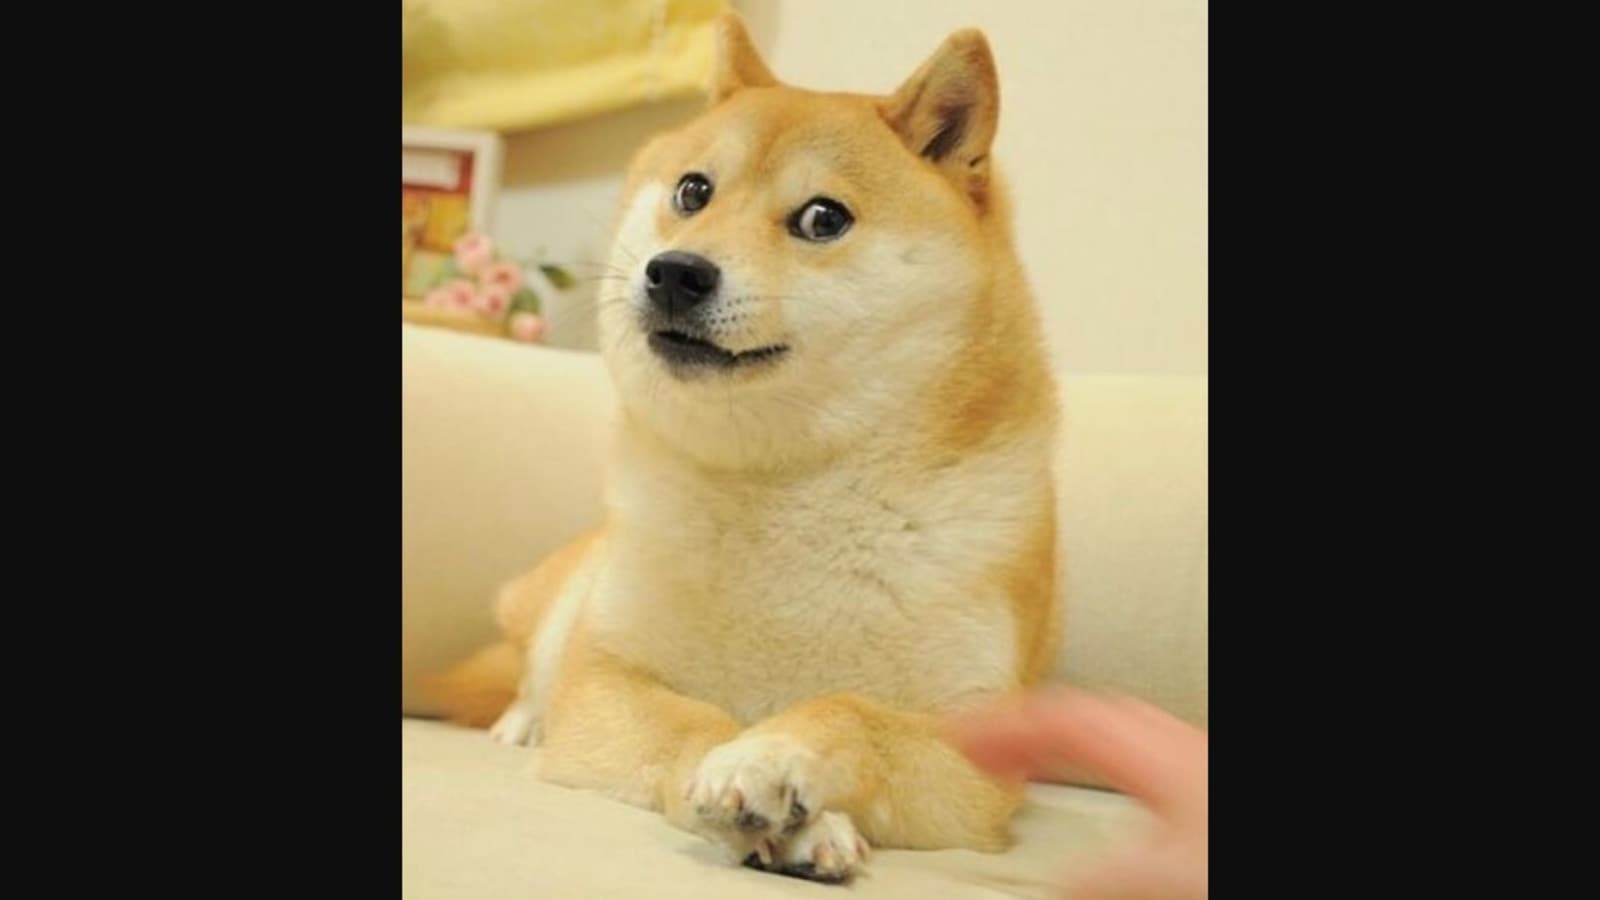 Dogecoin meme dog Kabosu on the mend after falling ill over Christmas | Daily Mail Online